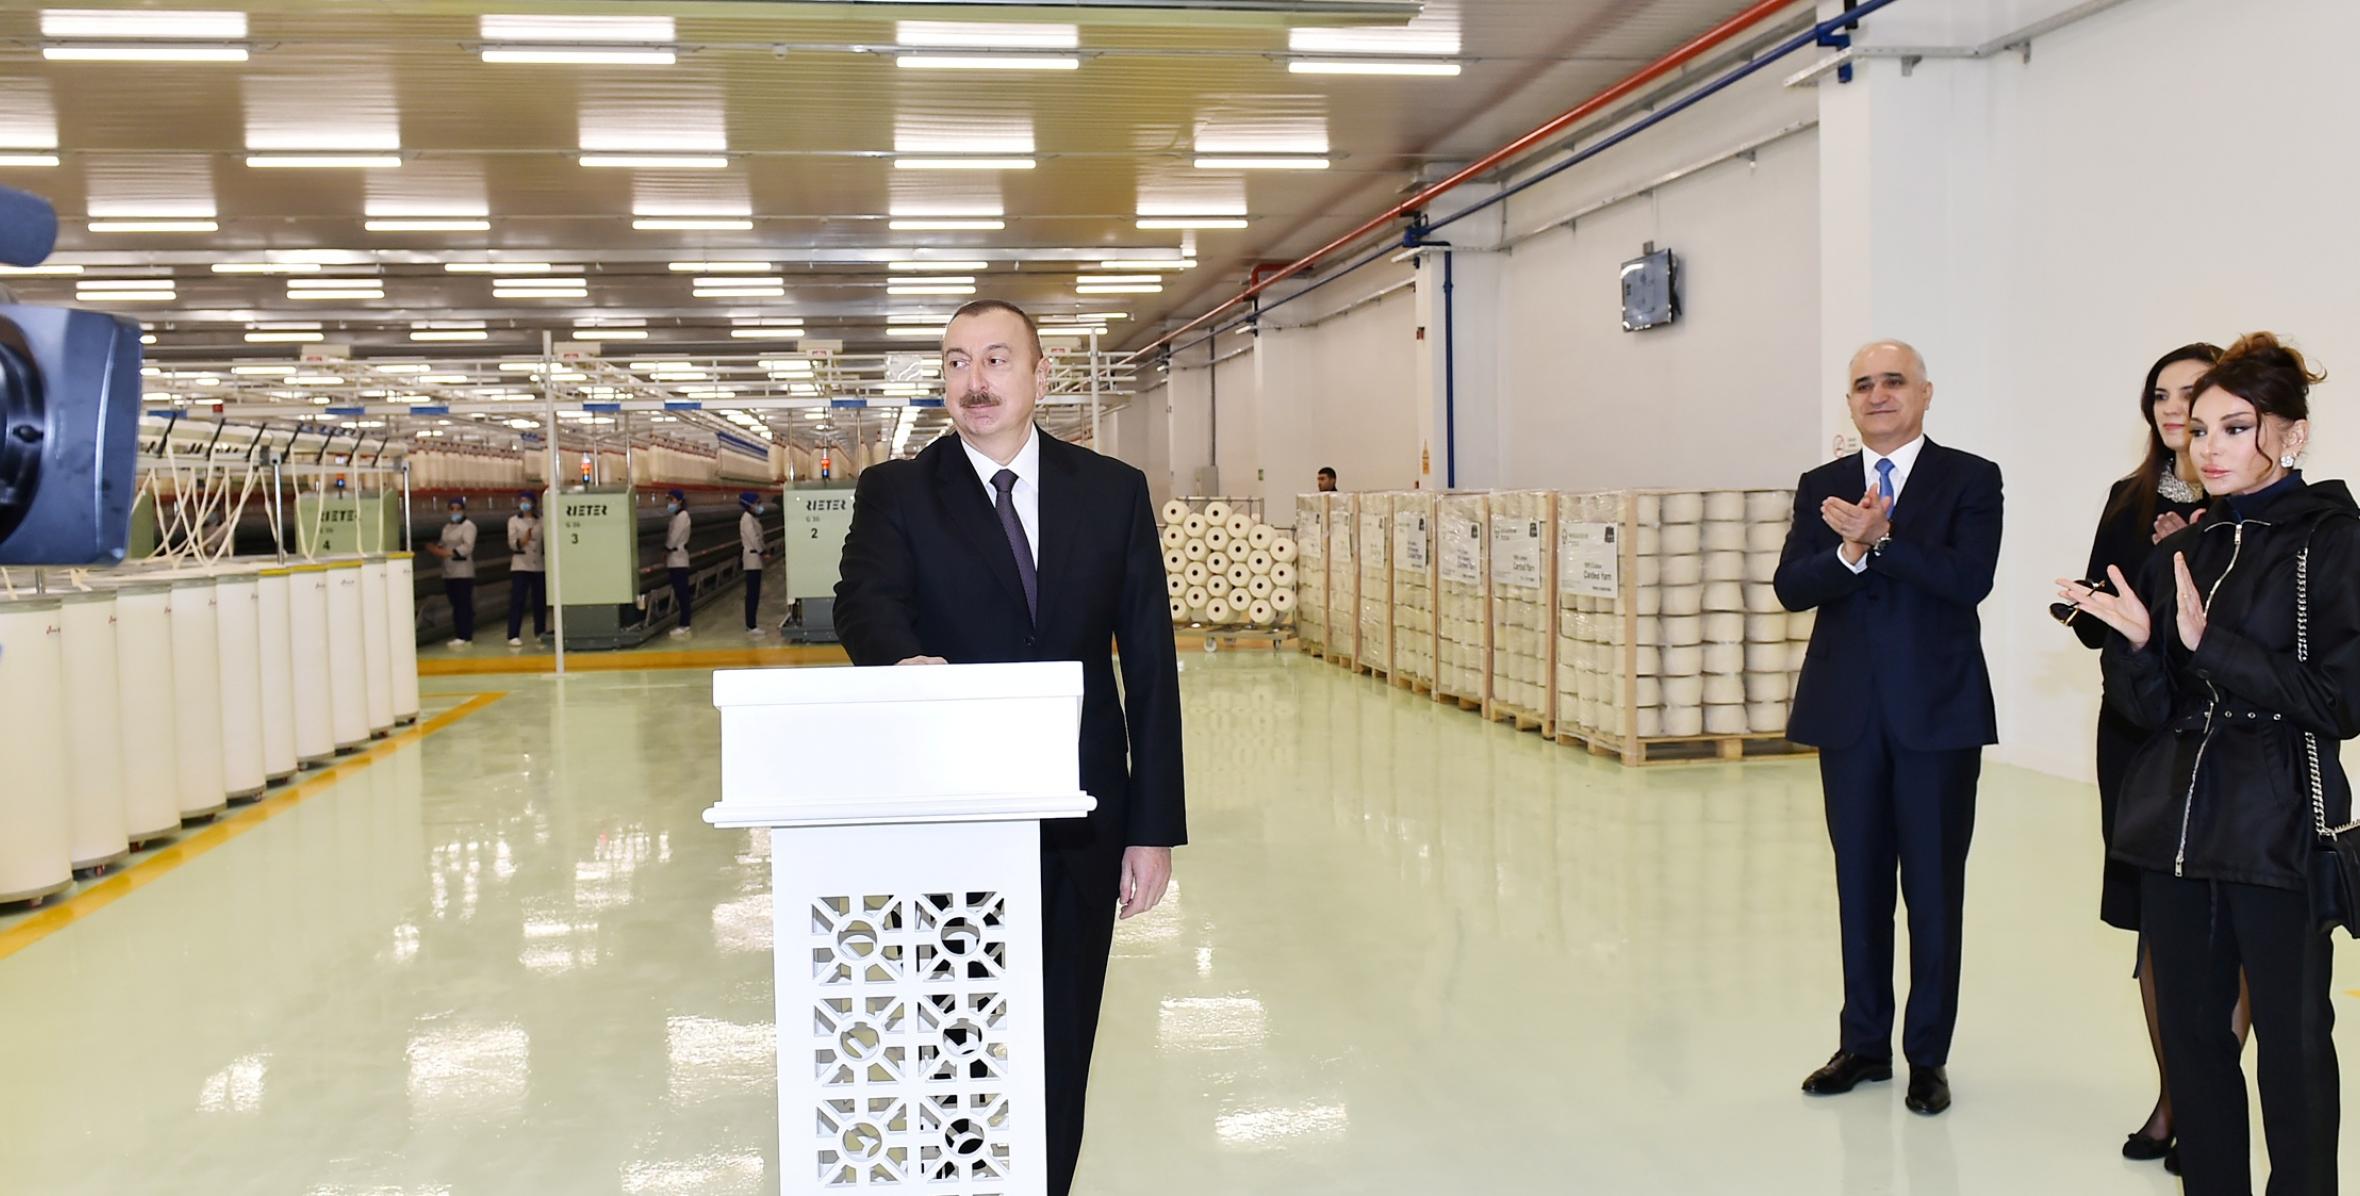 Ilham Aliyev attended opening of two yarn production plants owned by “Mingachevir Tekstil” LLC